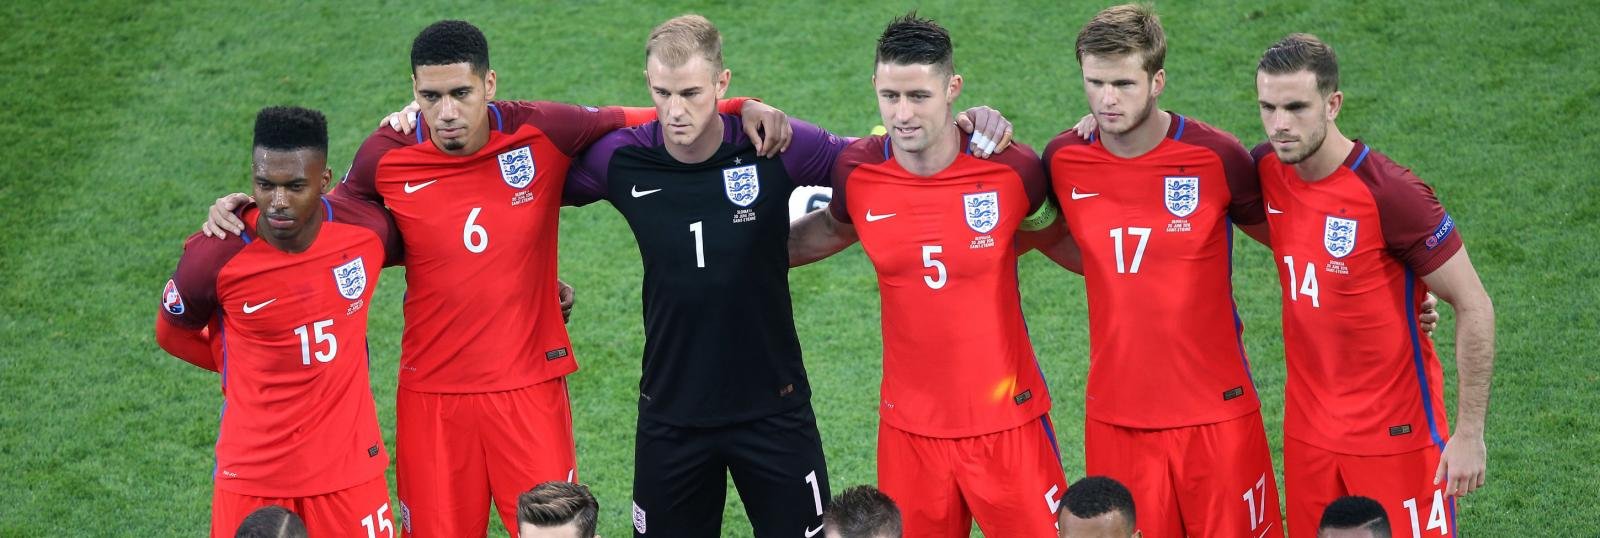 Why the tough half of the EURO 2016 draw may be a blessing for England